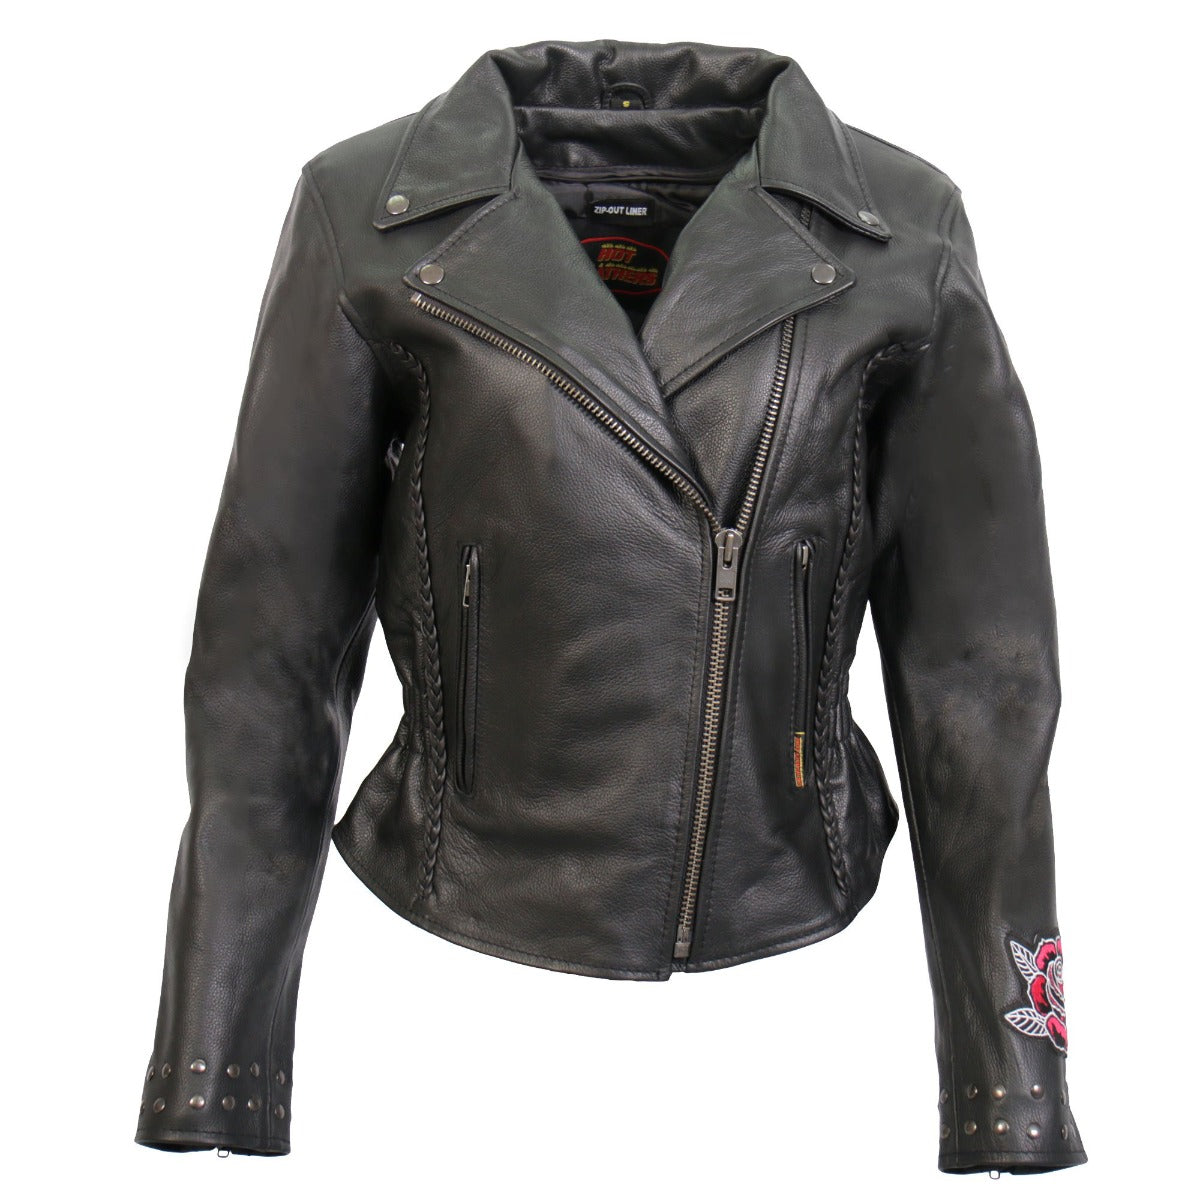 Hot Leathers Women's Braided Motorcycle Leather Jacket With Embroidered Bling Rose Design